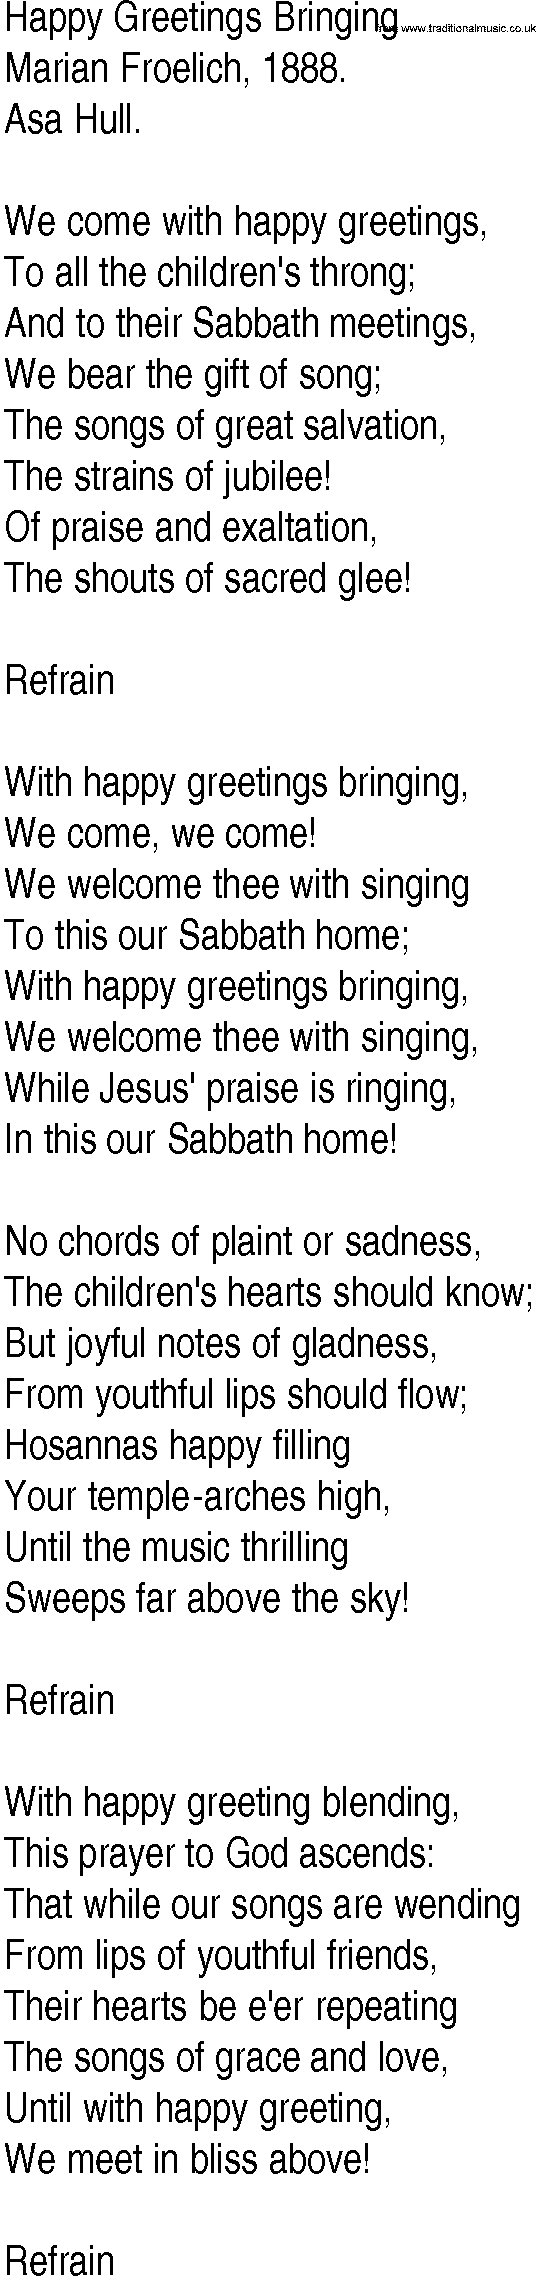 Hymn and Gospel Song: Happy Greetings Bringing by Marian Froelich lyrics